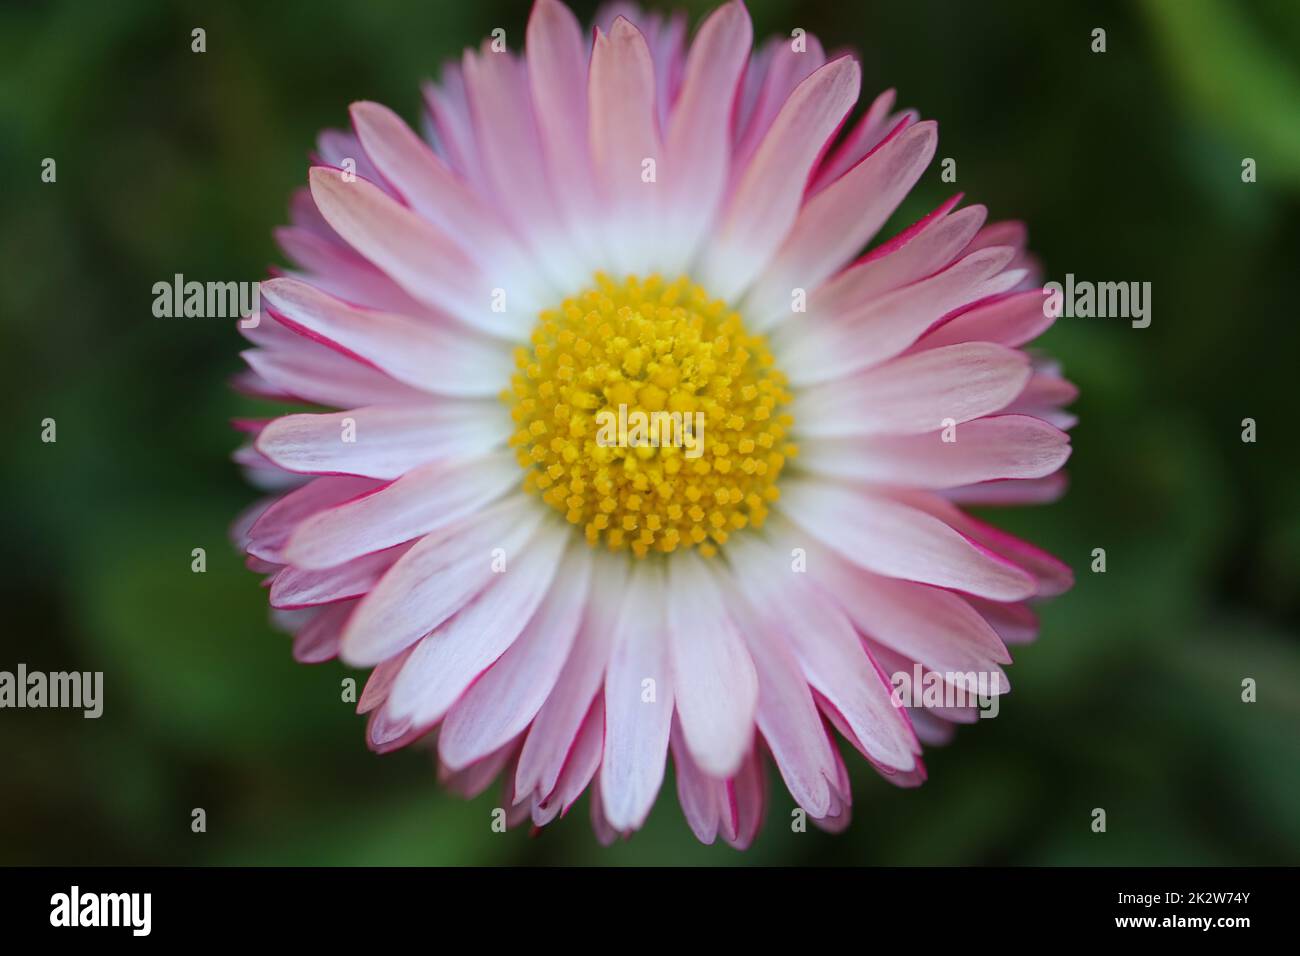 Common daisy with   white and pink petals, yellow stamens  and green leaves,  spring daisy in the garden, flower head macro, beauty in nature, floral Stock Photo